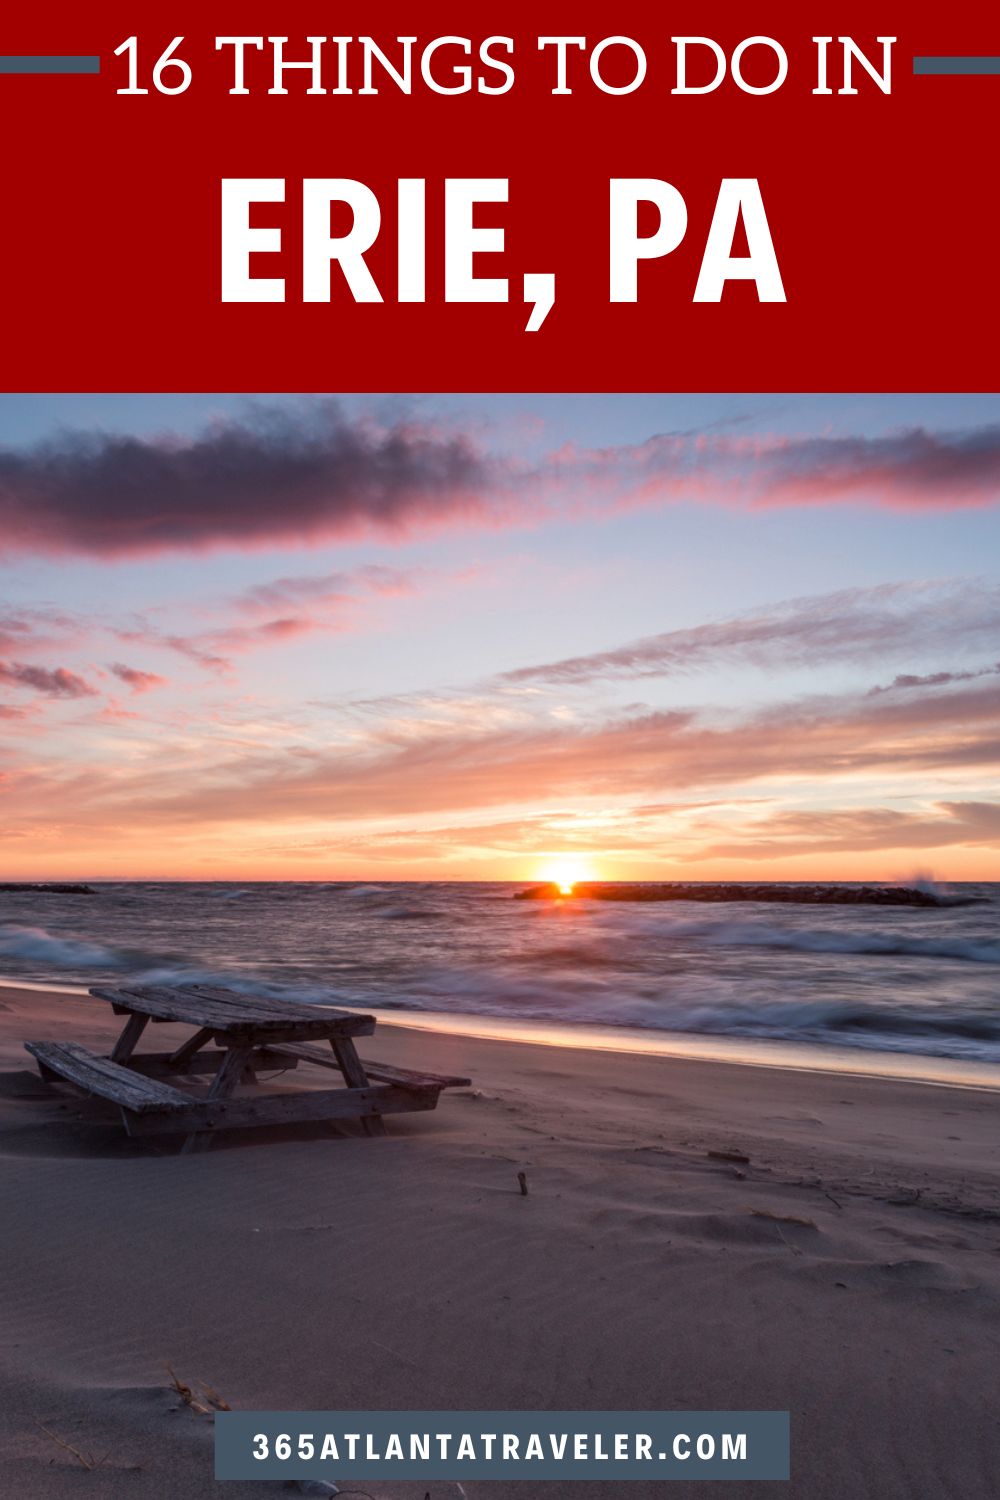 16 FUN THINGS TO DO IN ERIE PA EVERYONE WILL LOVE